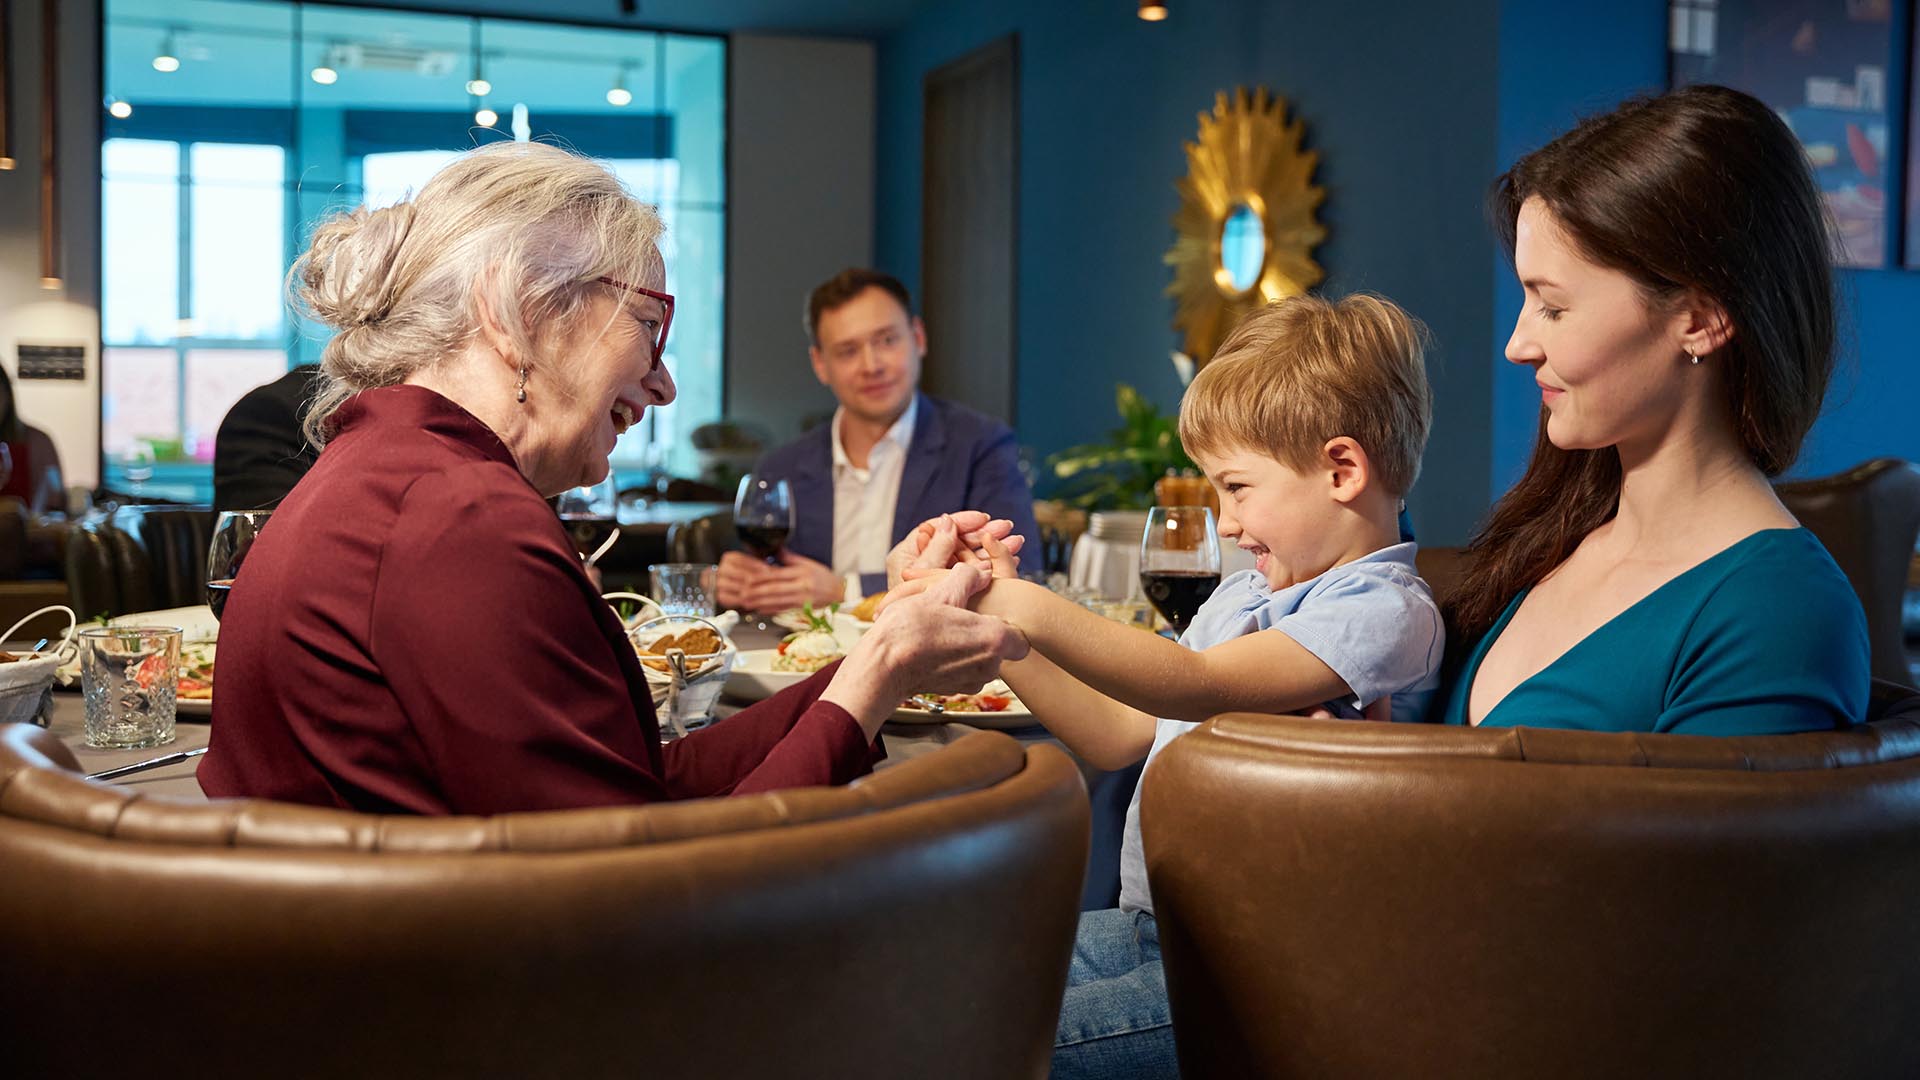 The Most Profitable Day of the Year for Restaurants – Mother’s Day